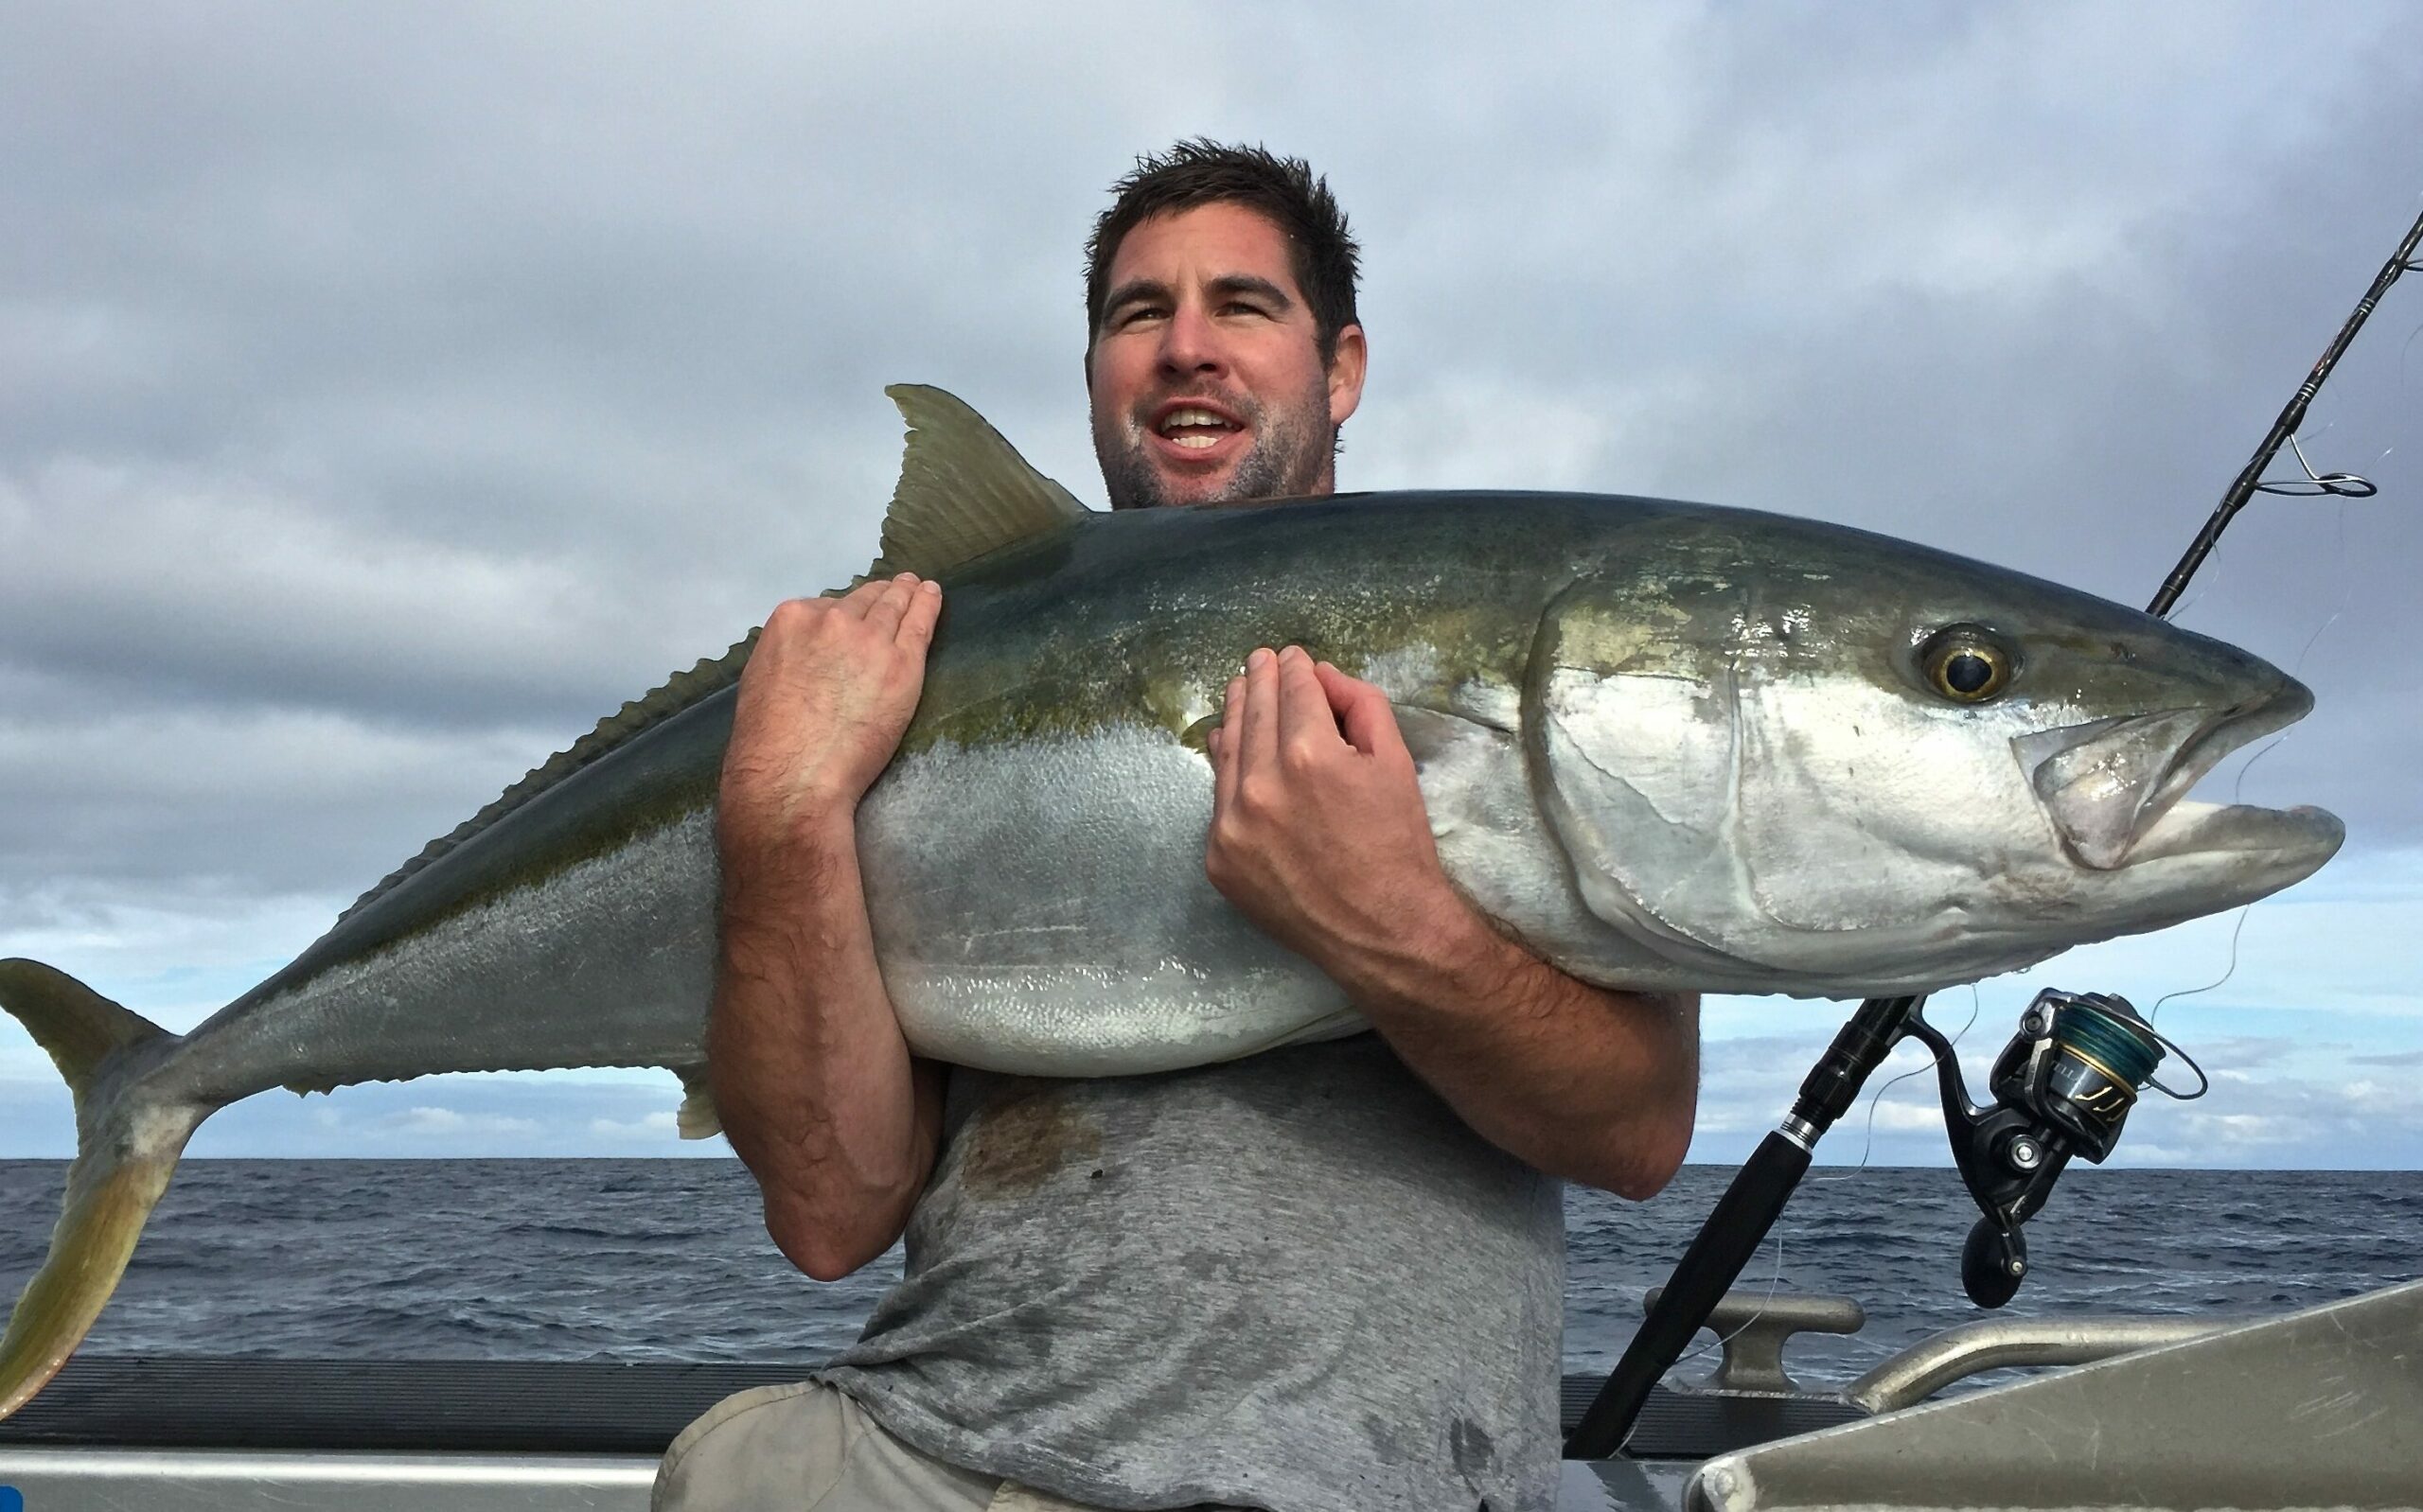 Chur! Nice work on a solid Whitianga Kingfish charter with Epic Adventures